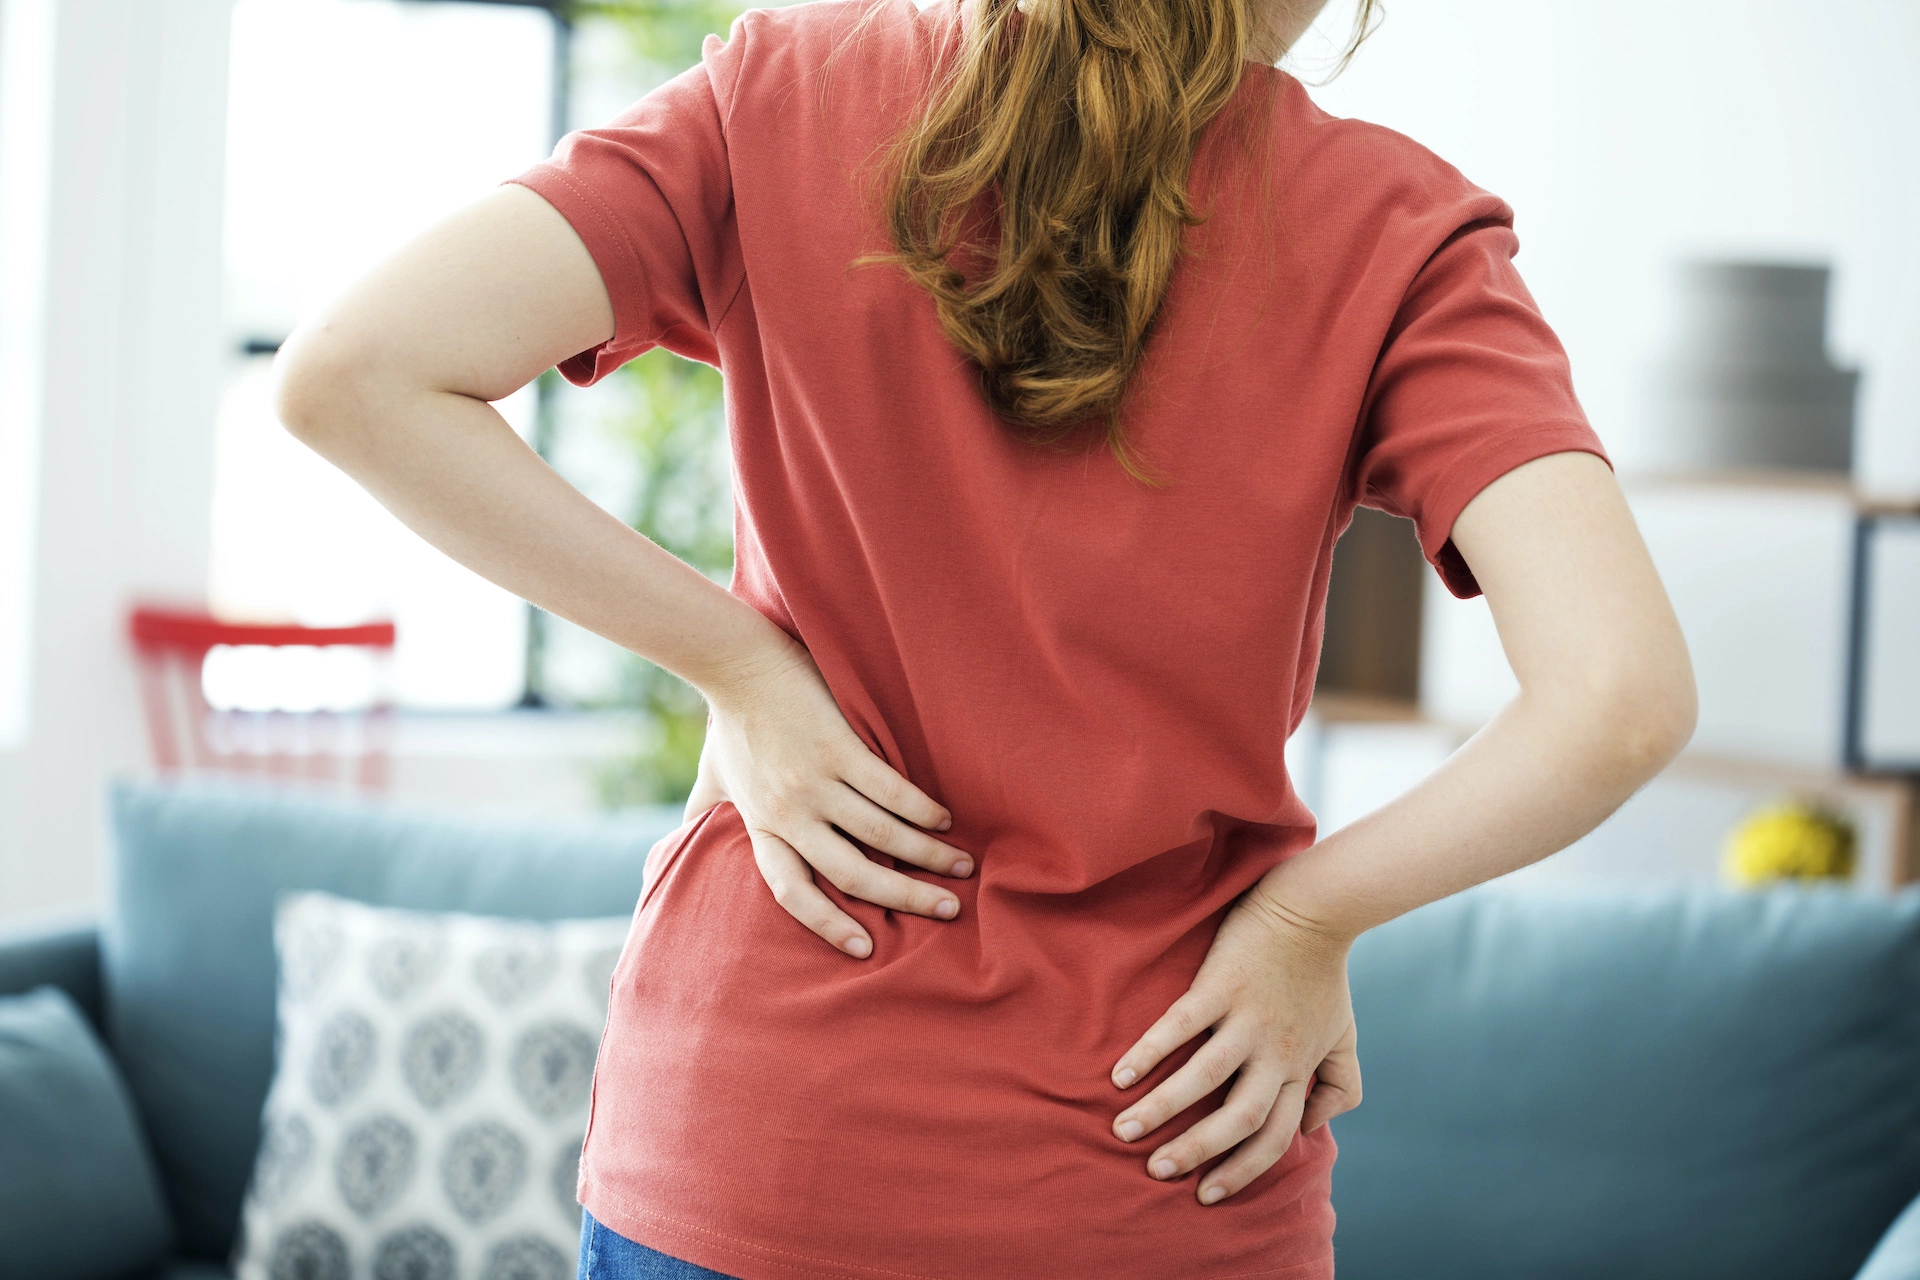 How do you know when back pain is serious?